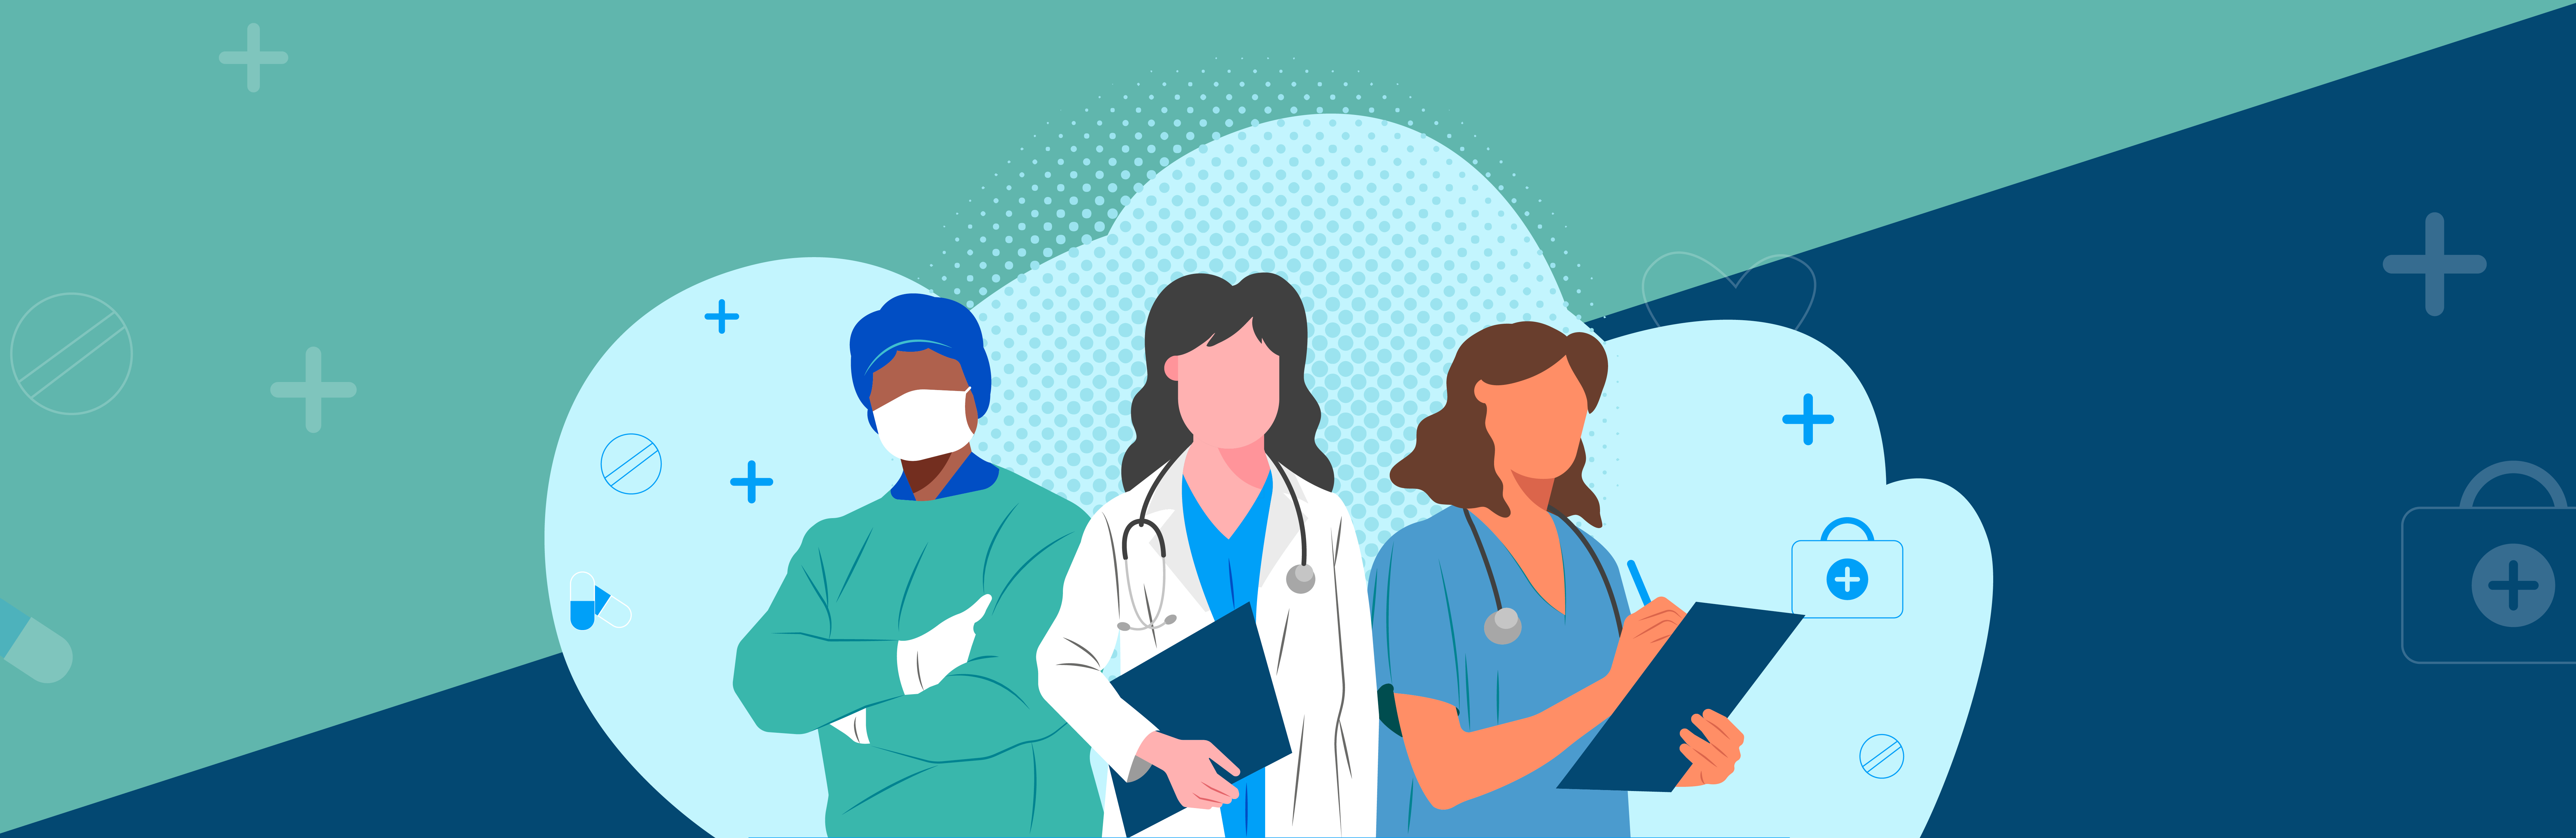 Illustrated nurse silhouettes standing close to each other